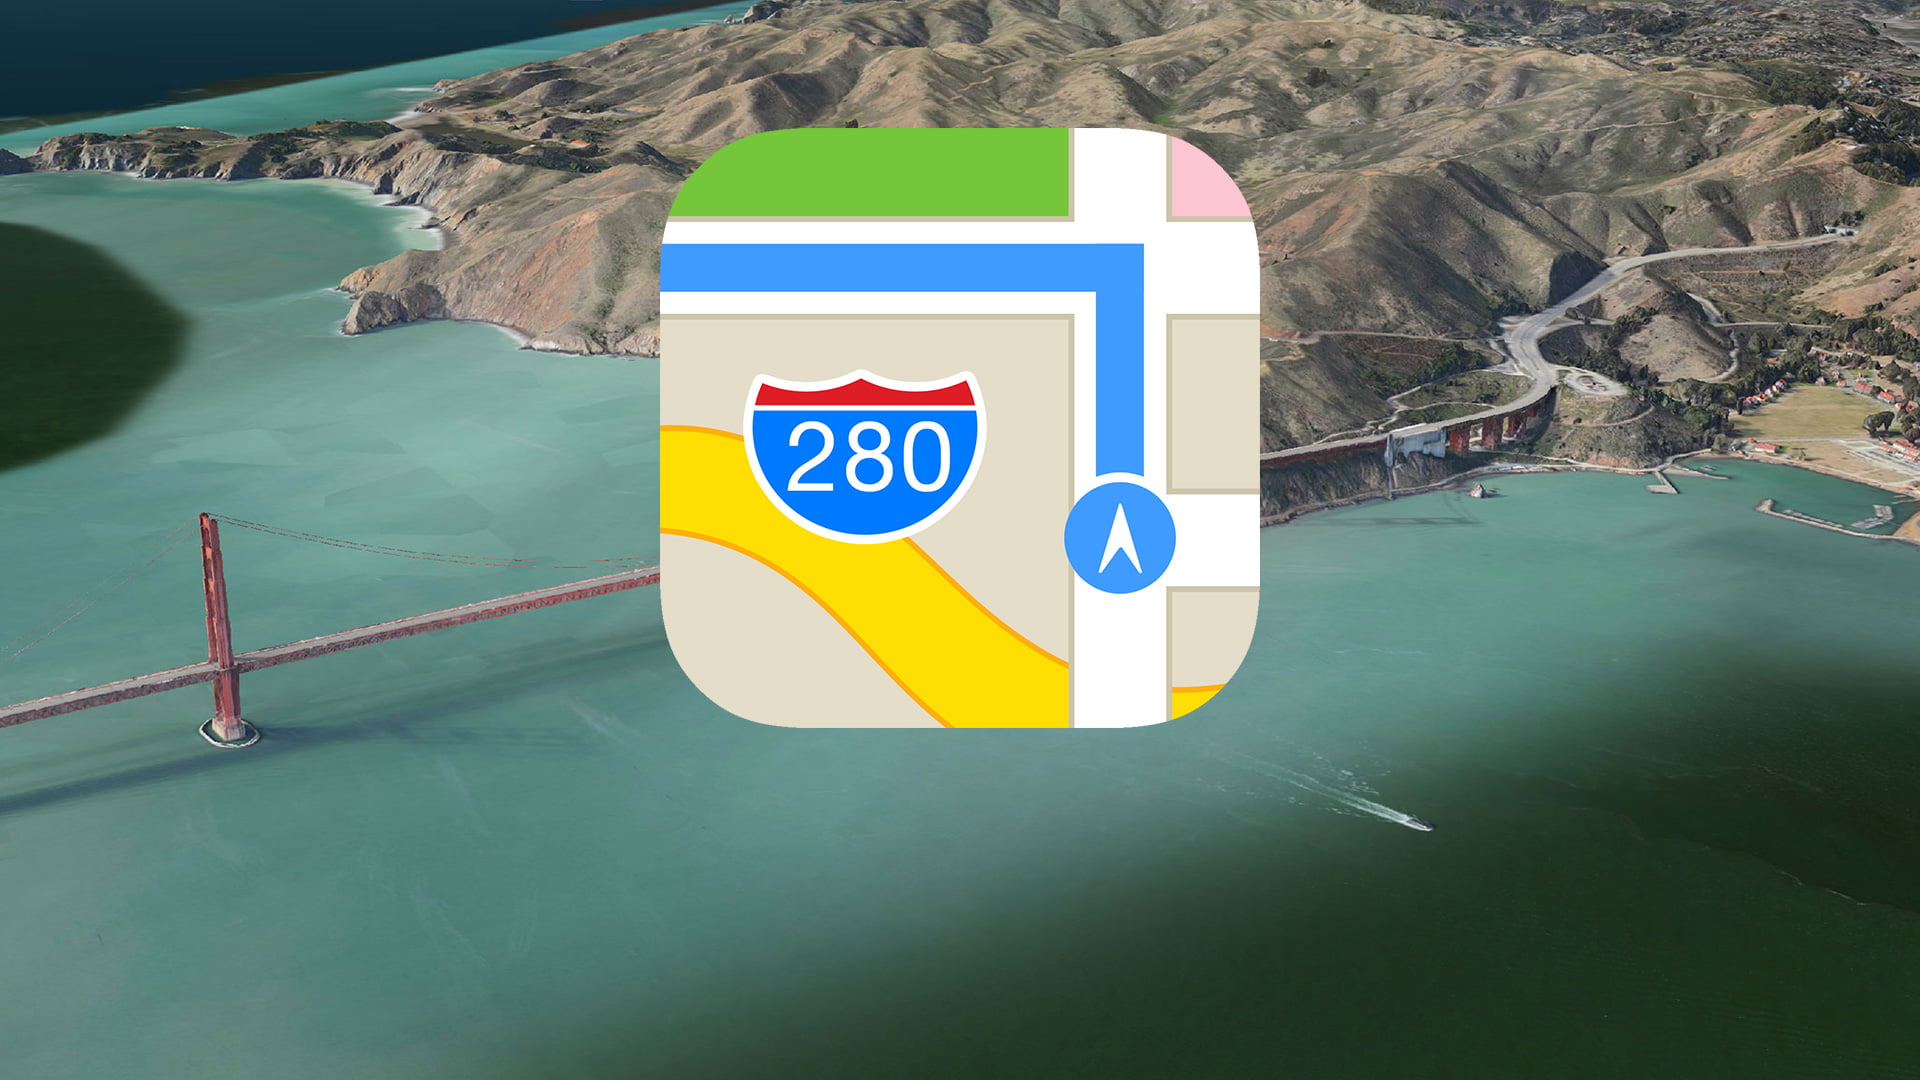 Can Apple Maps challenge Google Maps in 2018?